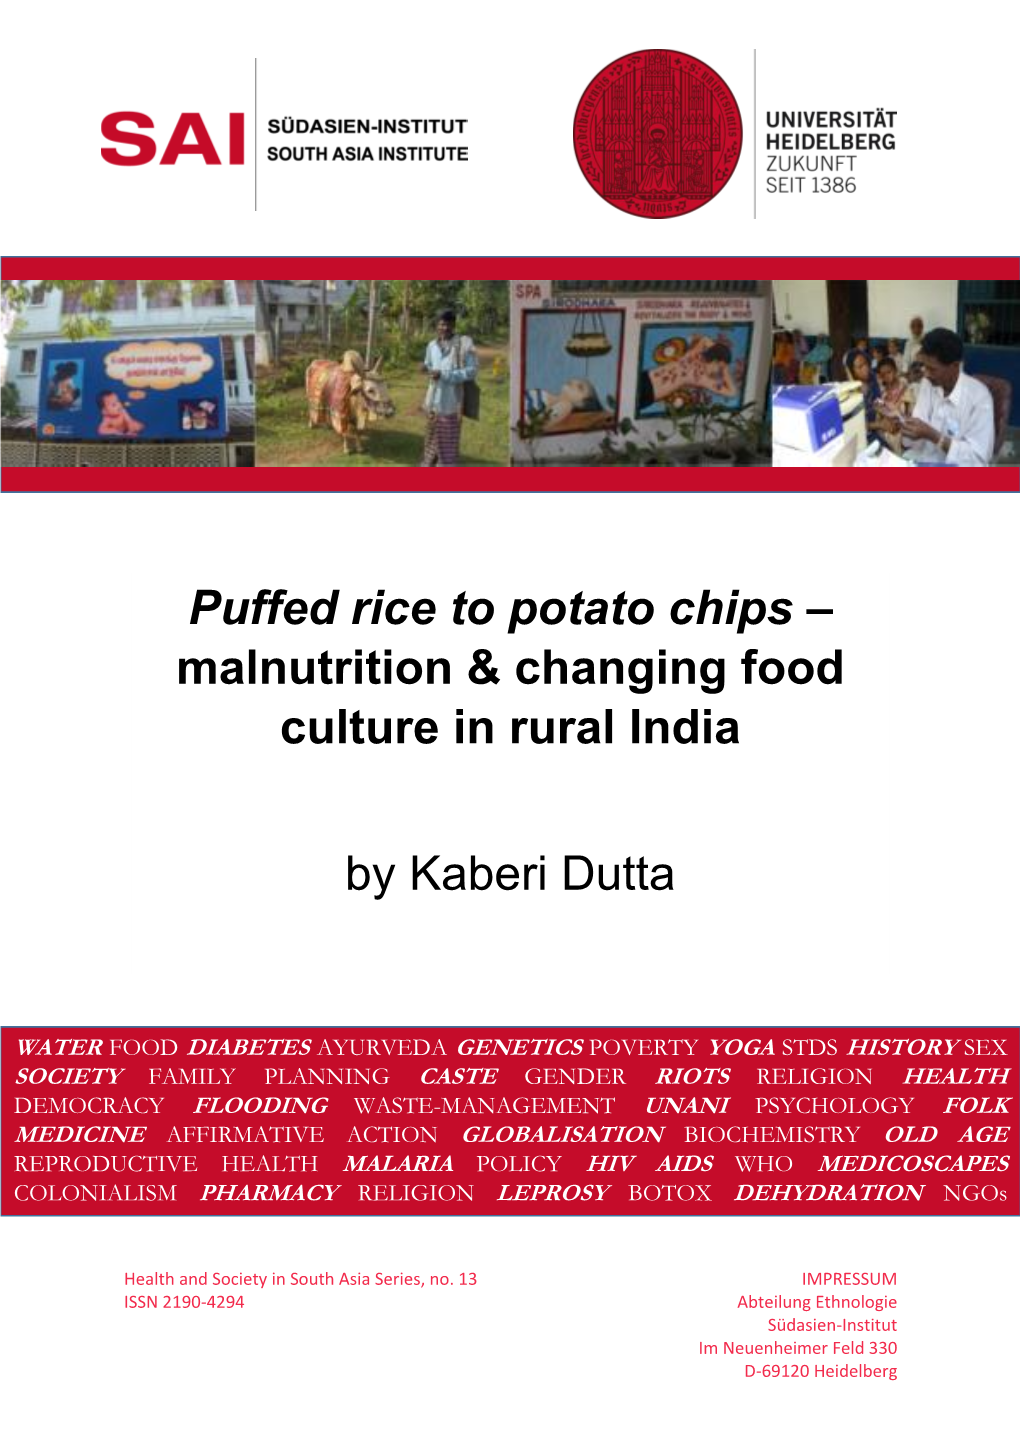 Malnutrition & Changing Food Culture in Rural India